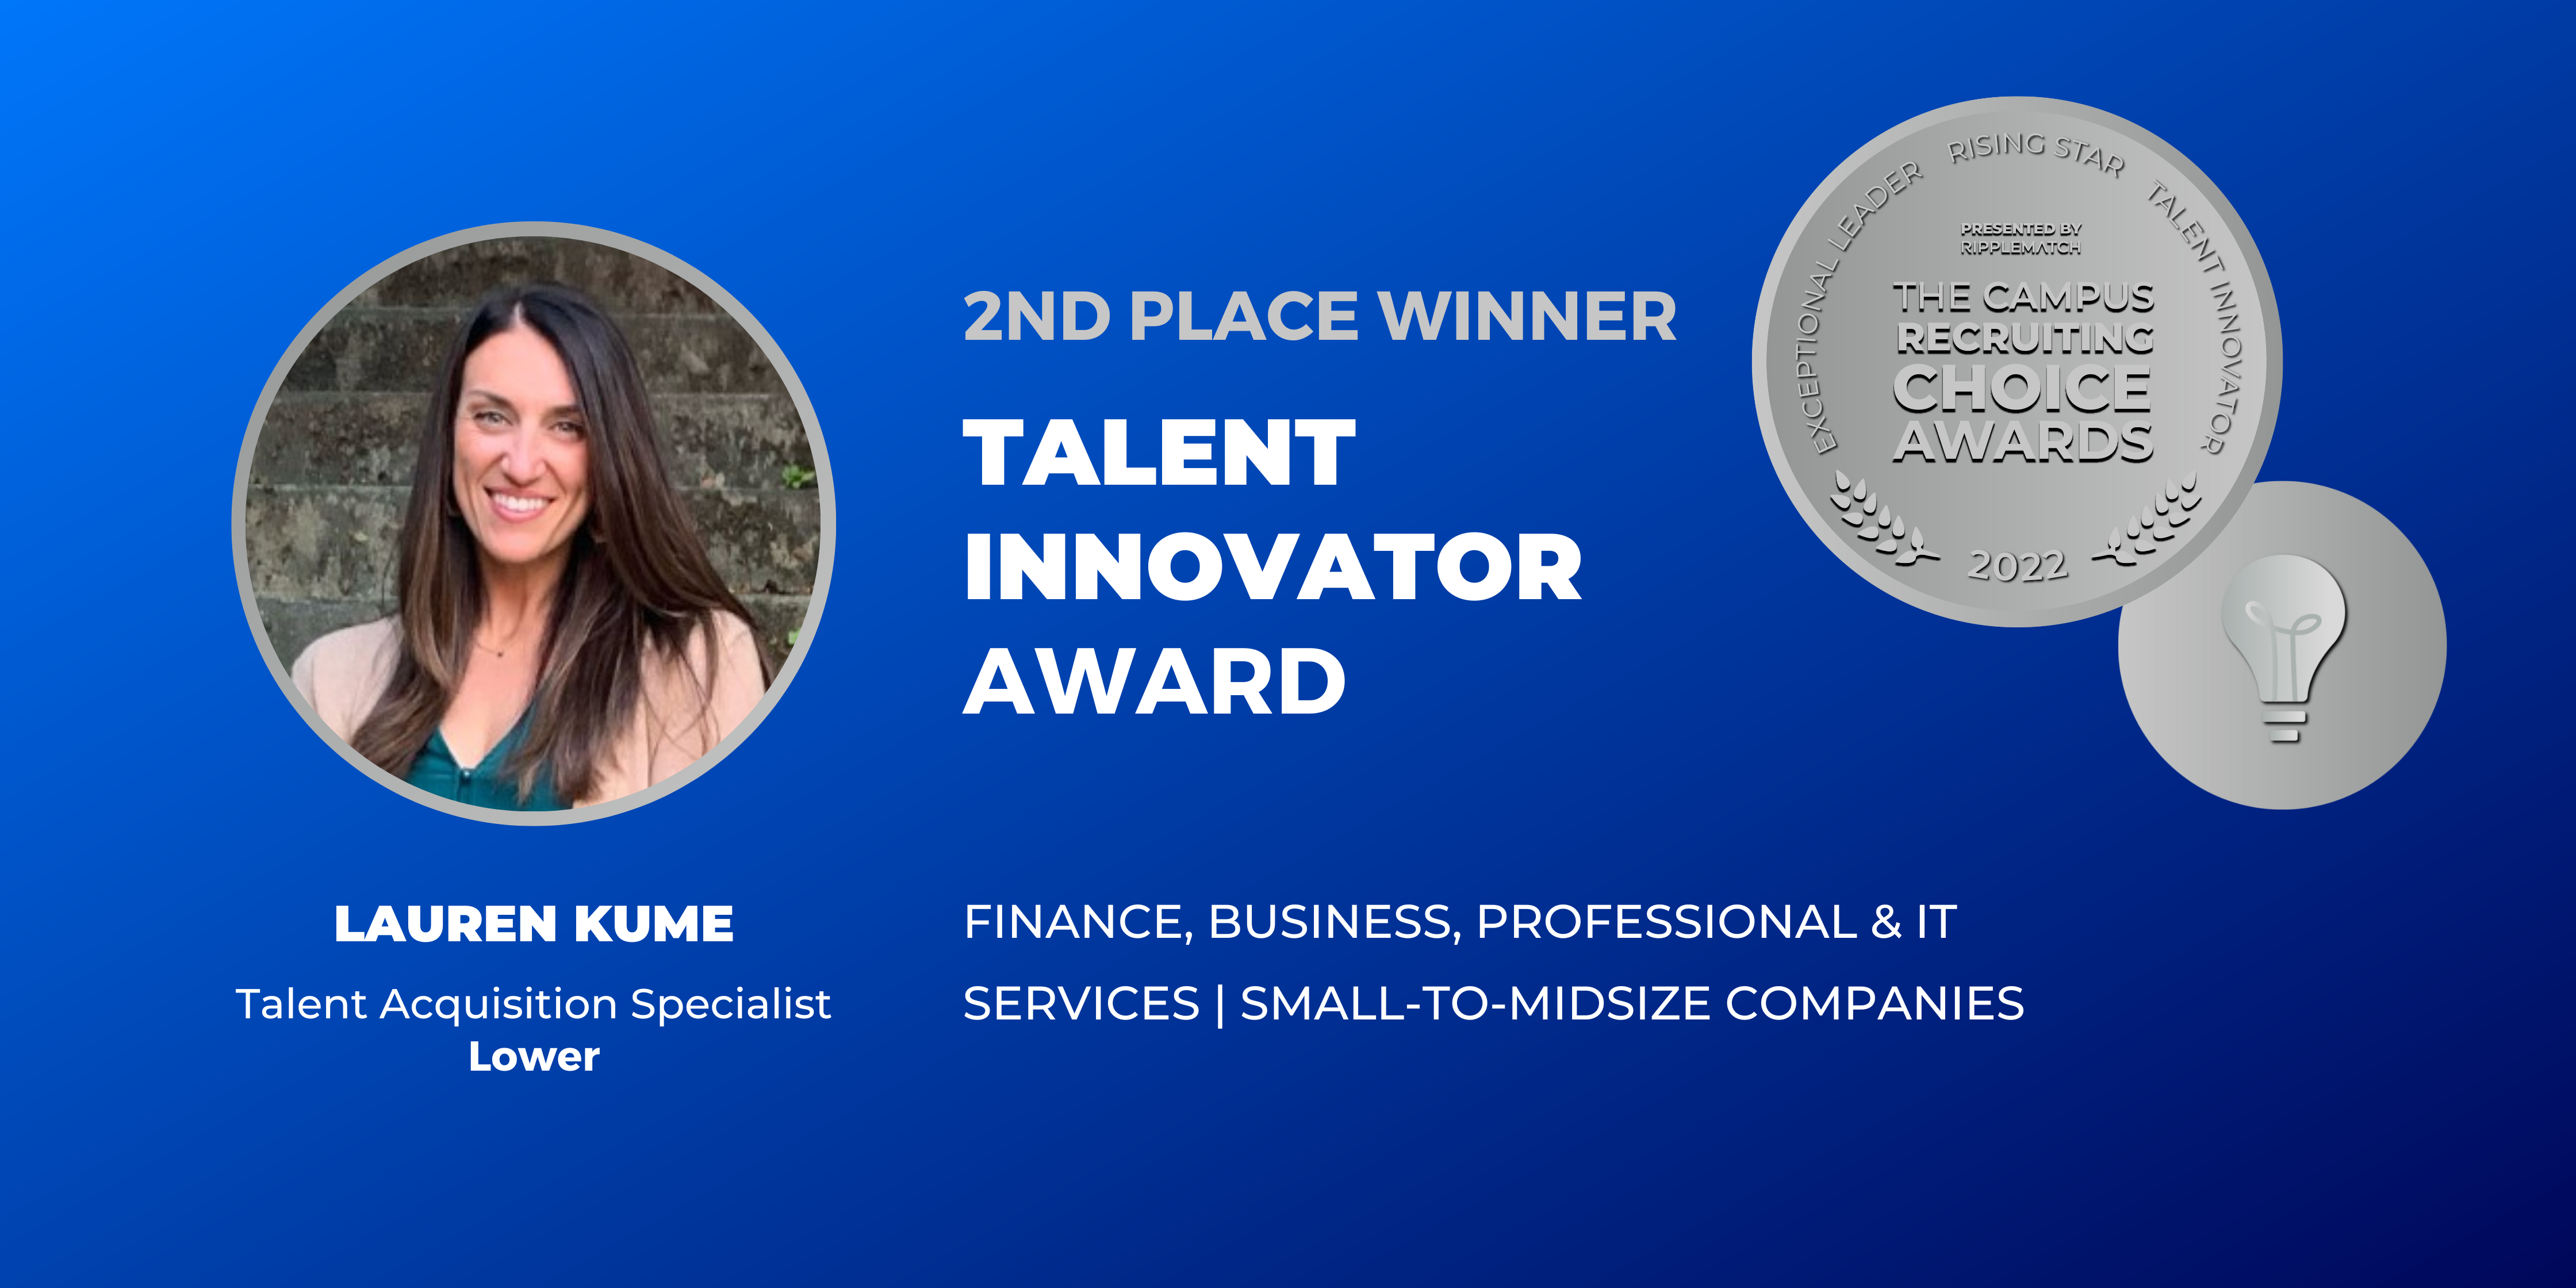 TALENT INNOVATOR - 2nd place - Finance, Business, Professional & IT Services _ Small-to-Midsize Companies - Lauren Kume